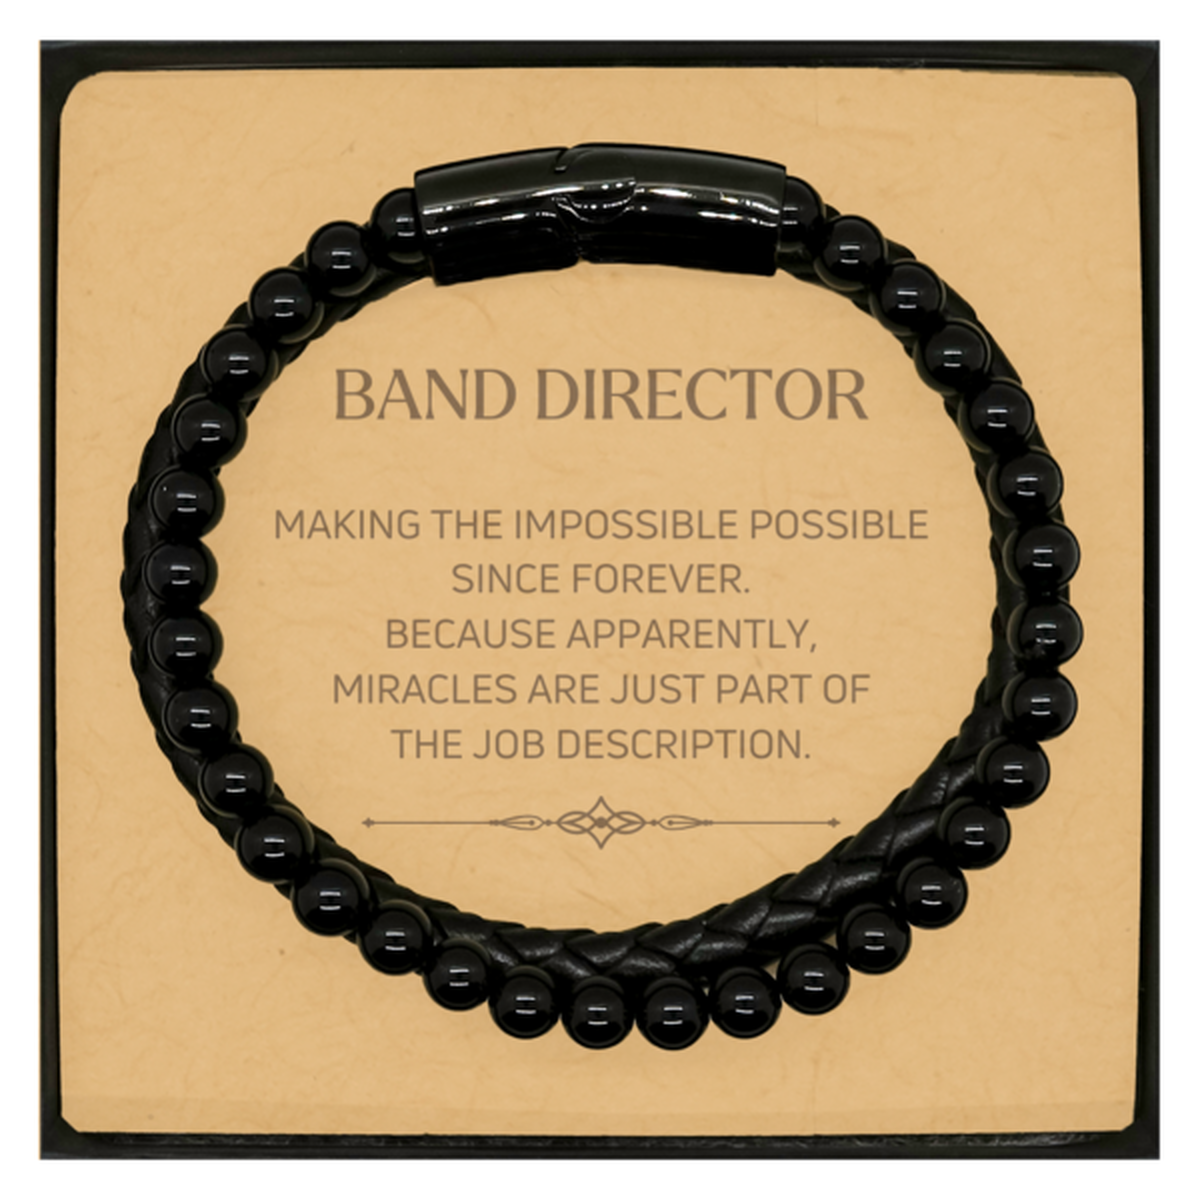 Funny Band Director Gifts, Miracles are just part of the job description, Inspirational Birthday Christmas Stone Leather Bracelets For Band Director, Men, Women, Coworkers, Friends, Boss